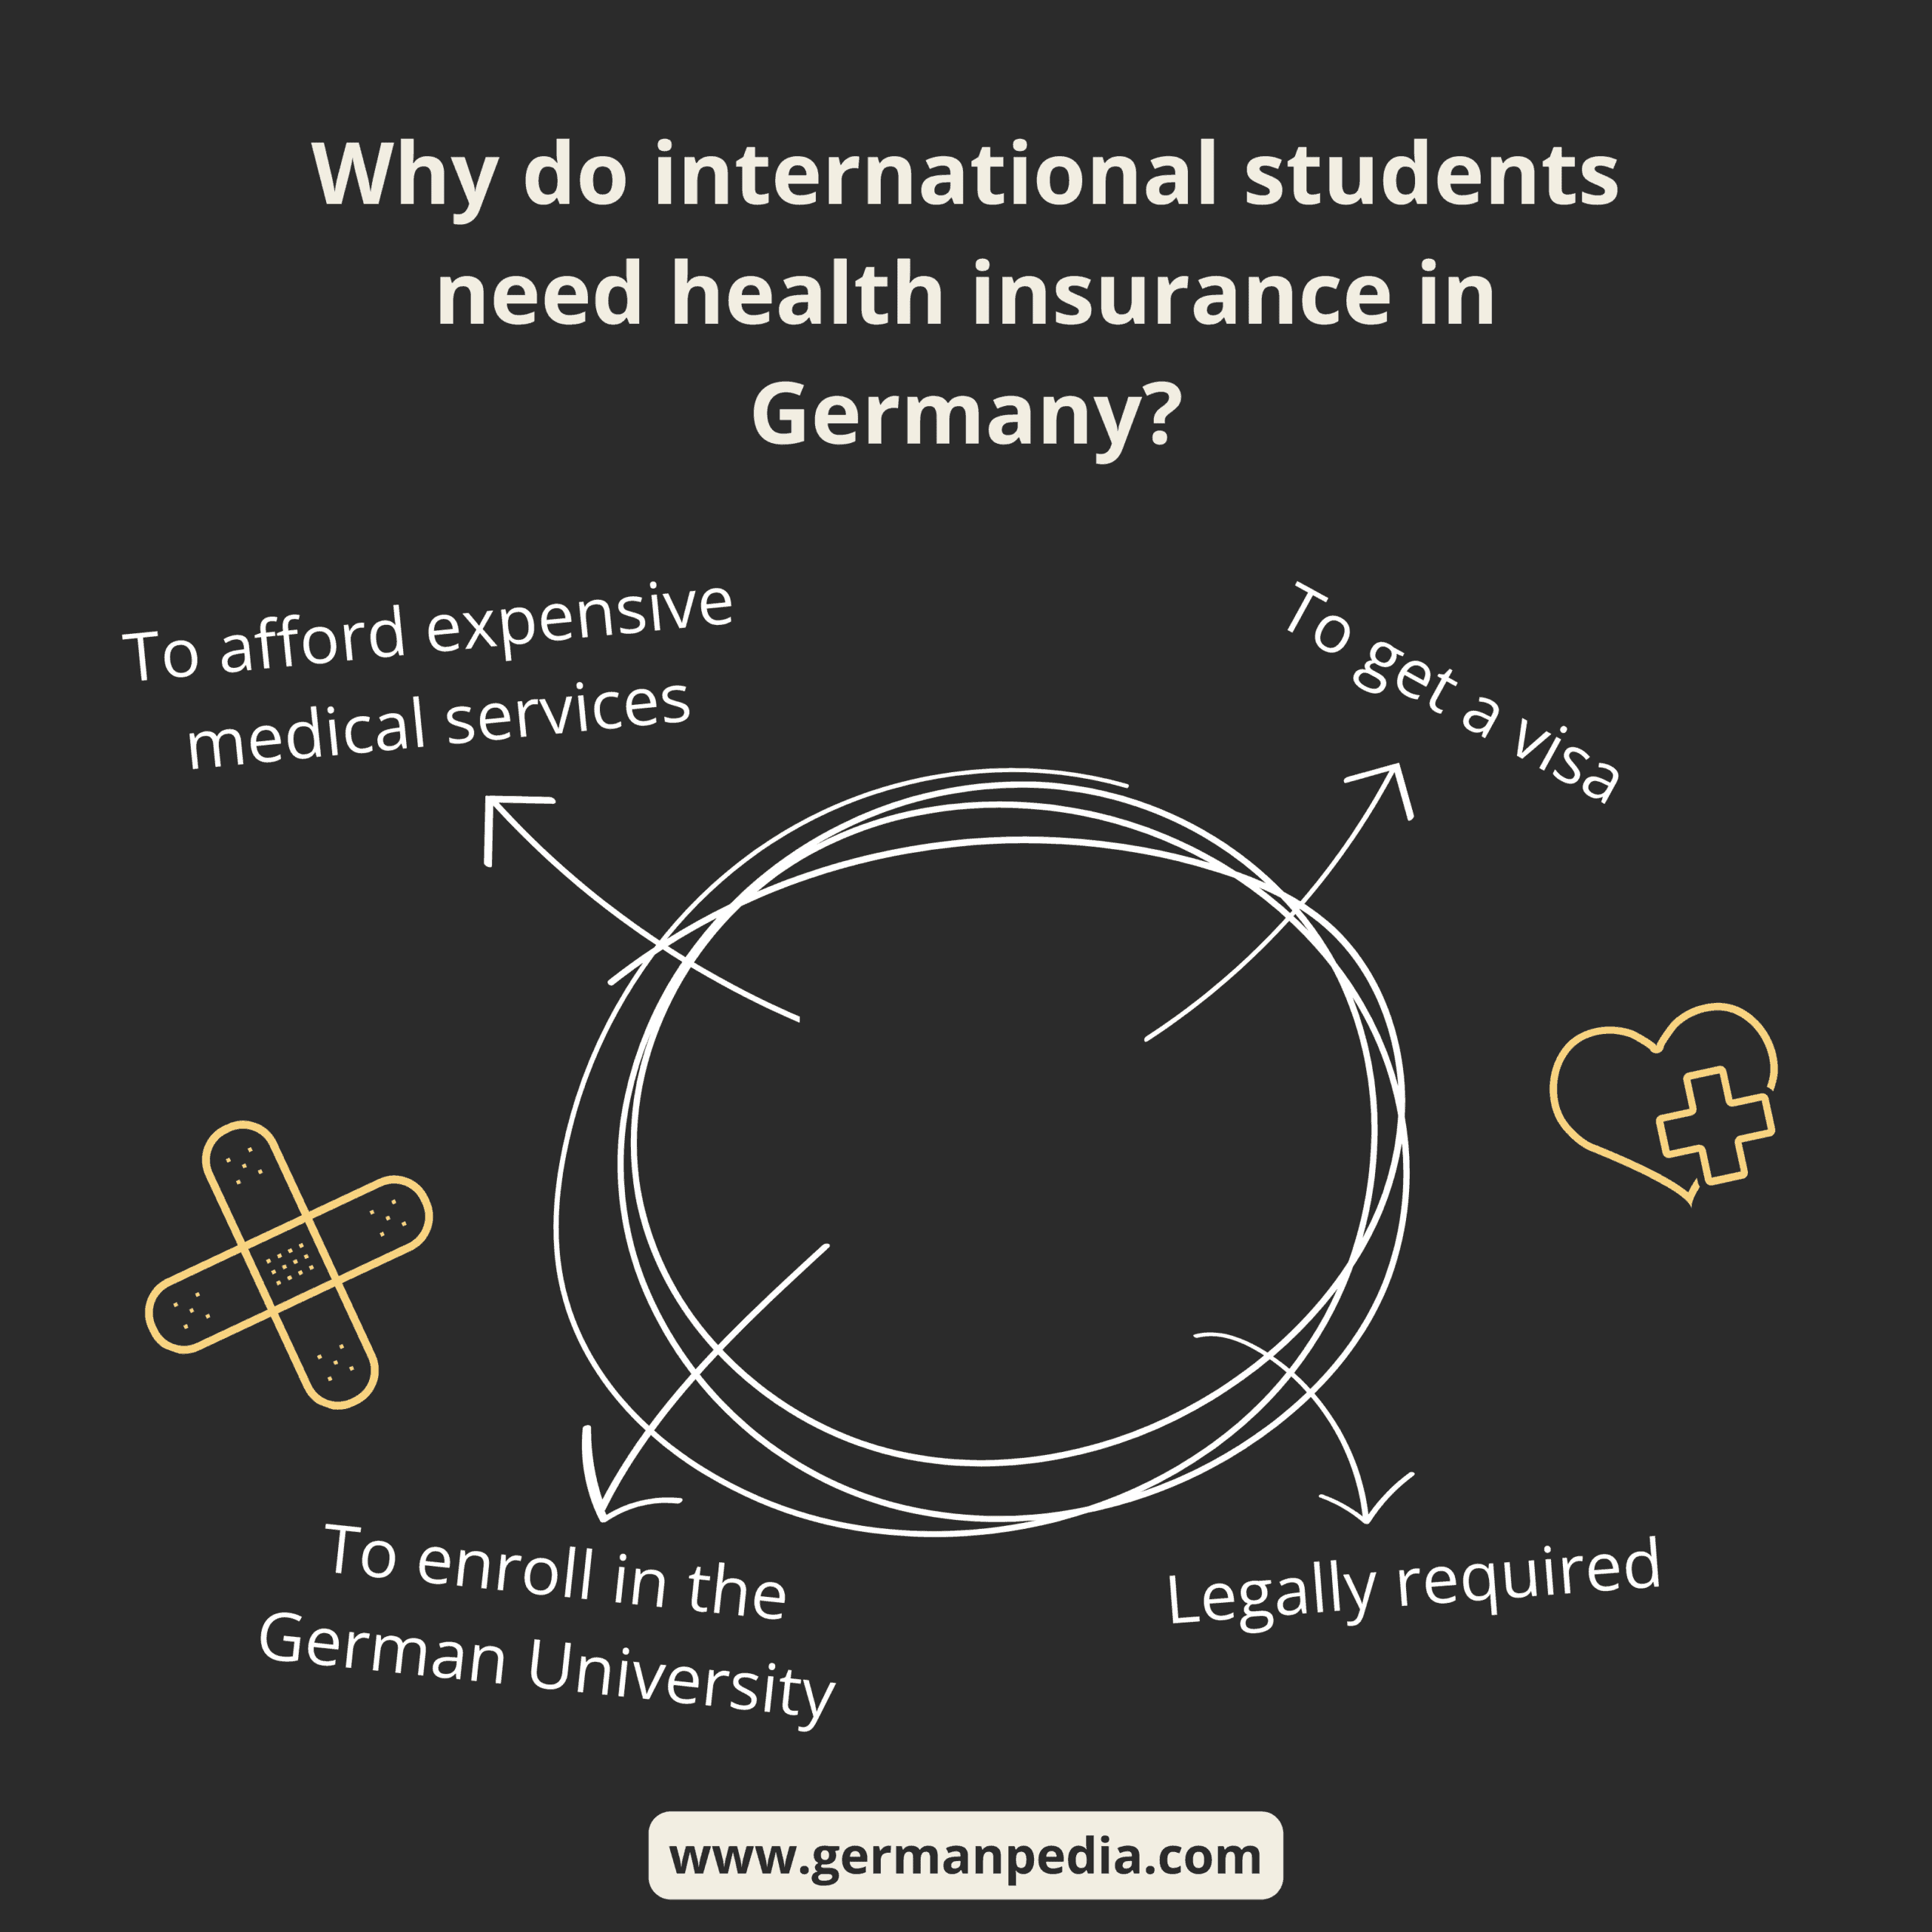 Why do international students need health insurance in Germany?